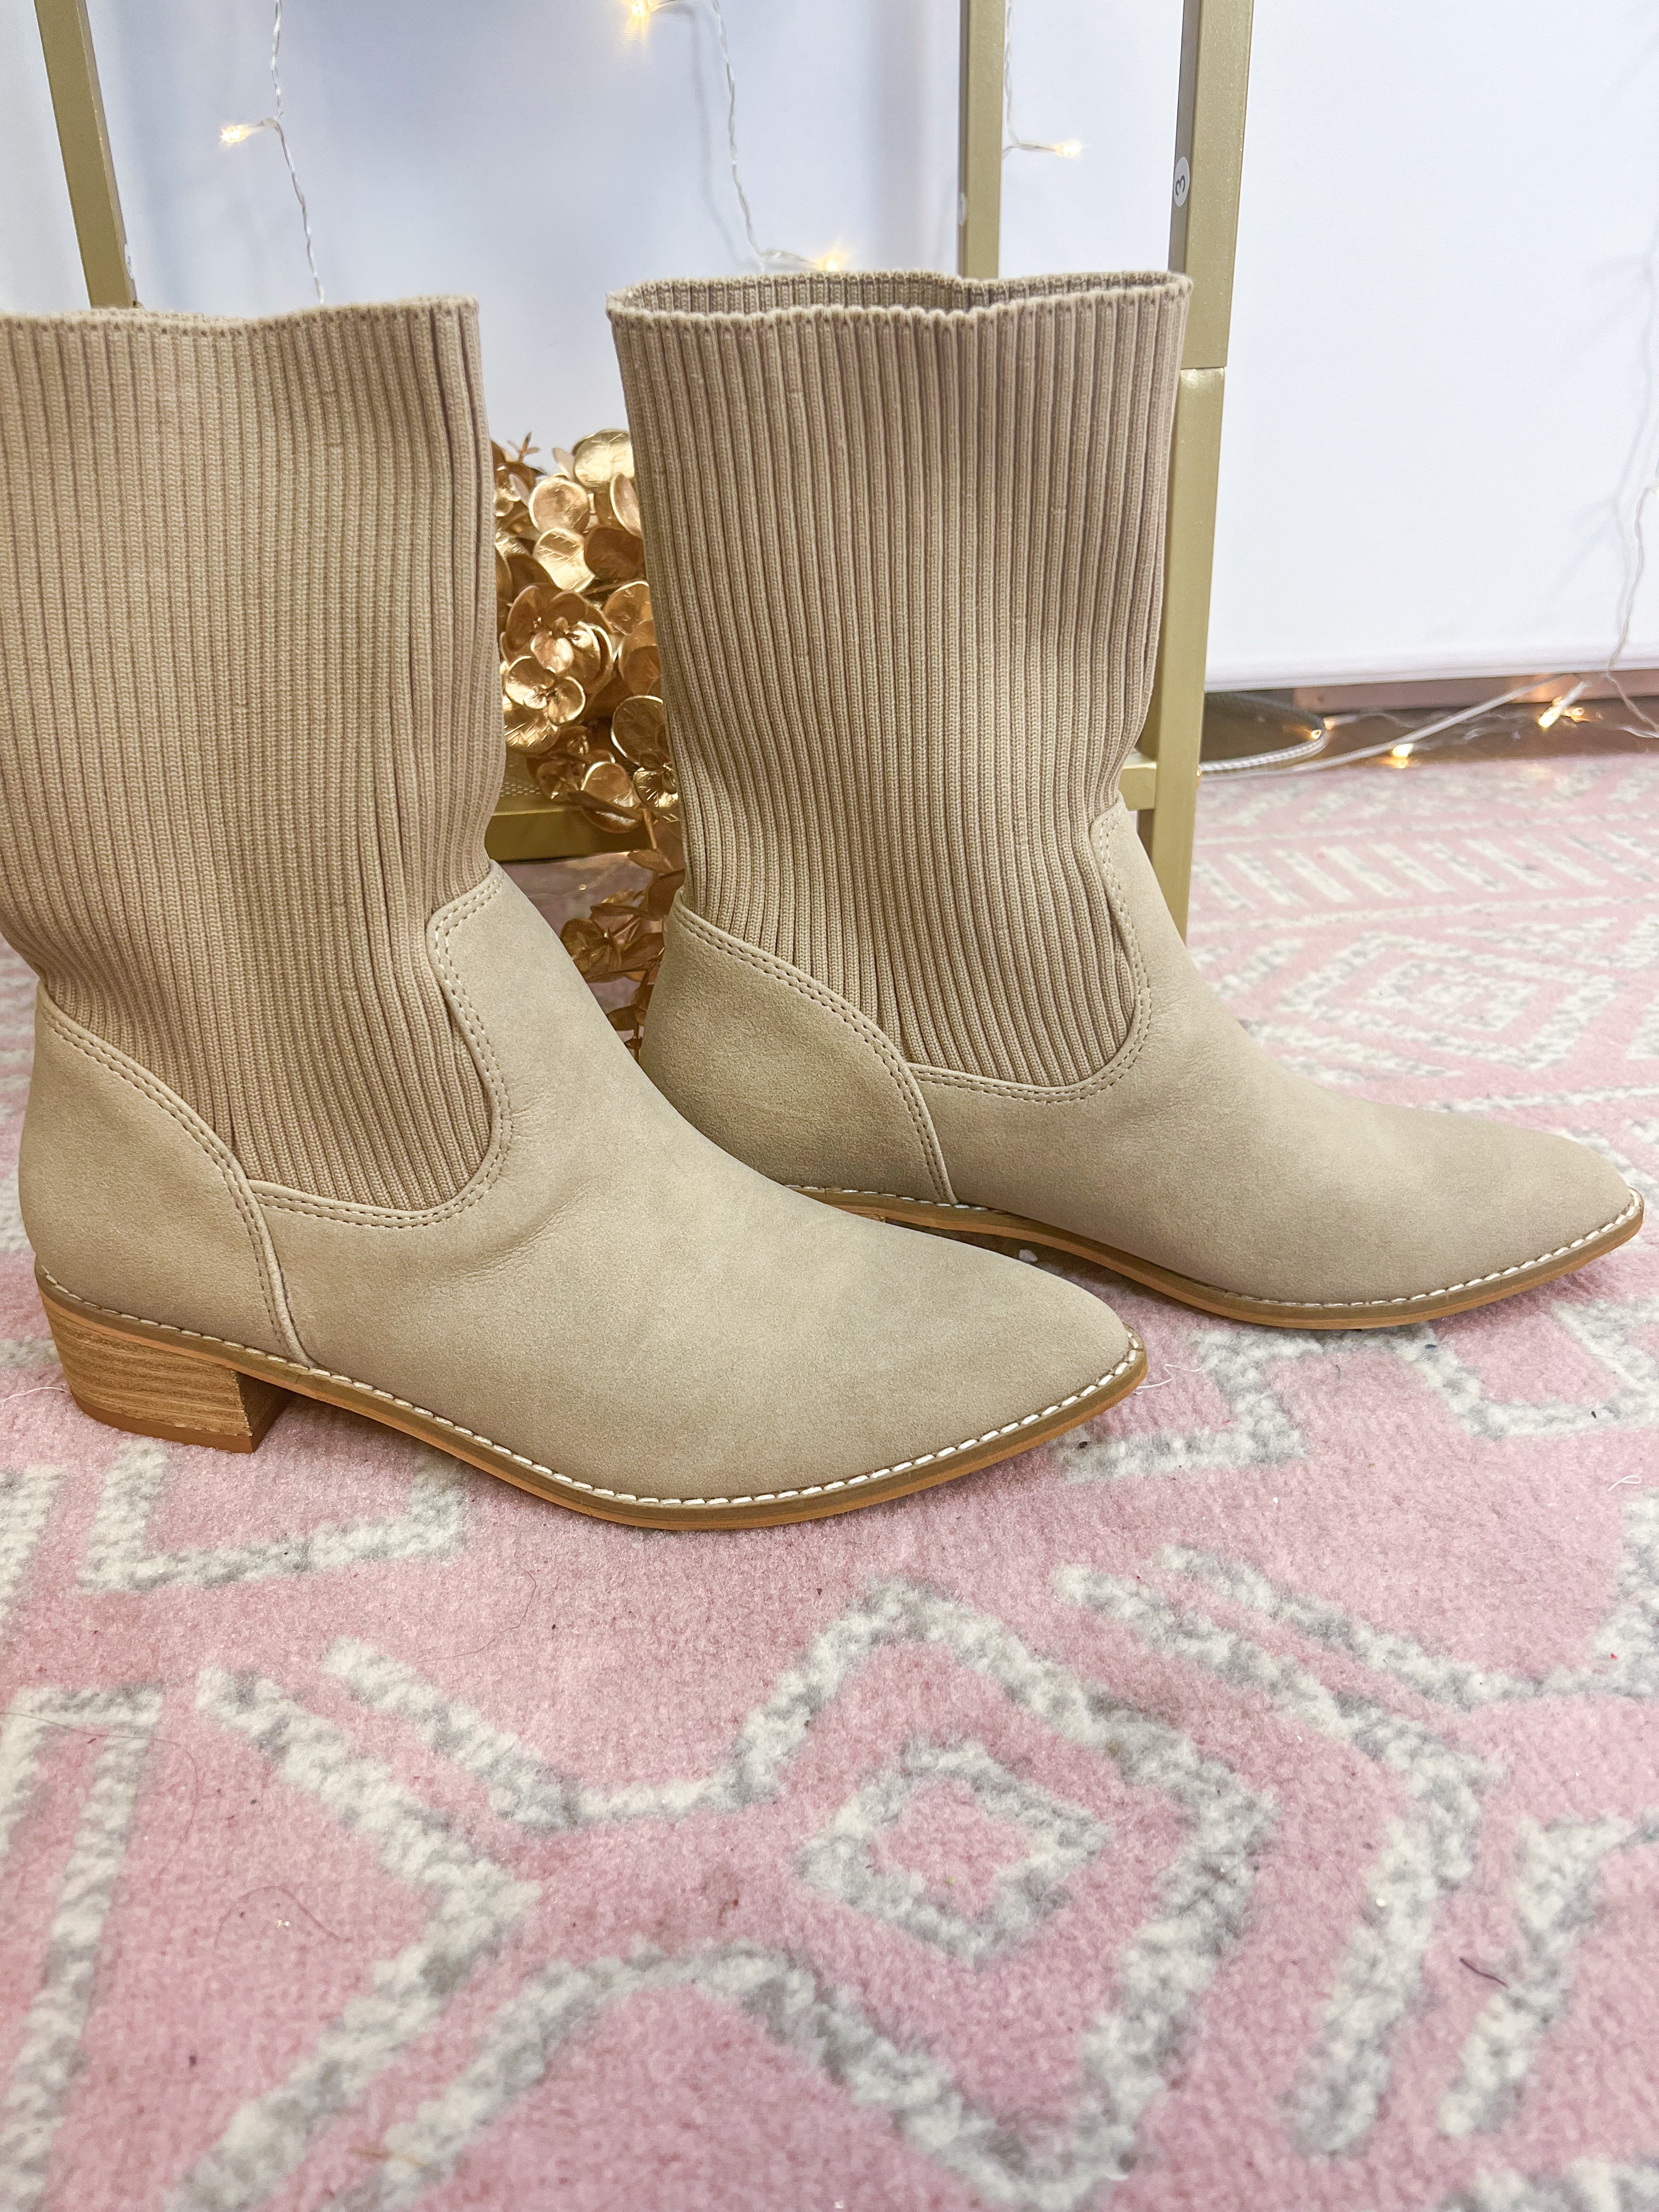 Winter Wishes Boot-Boots-The Lovely Closet-The Lovely Closet, Women's Fashion Boutique in Alexandria, KY